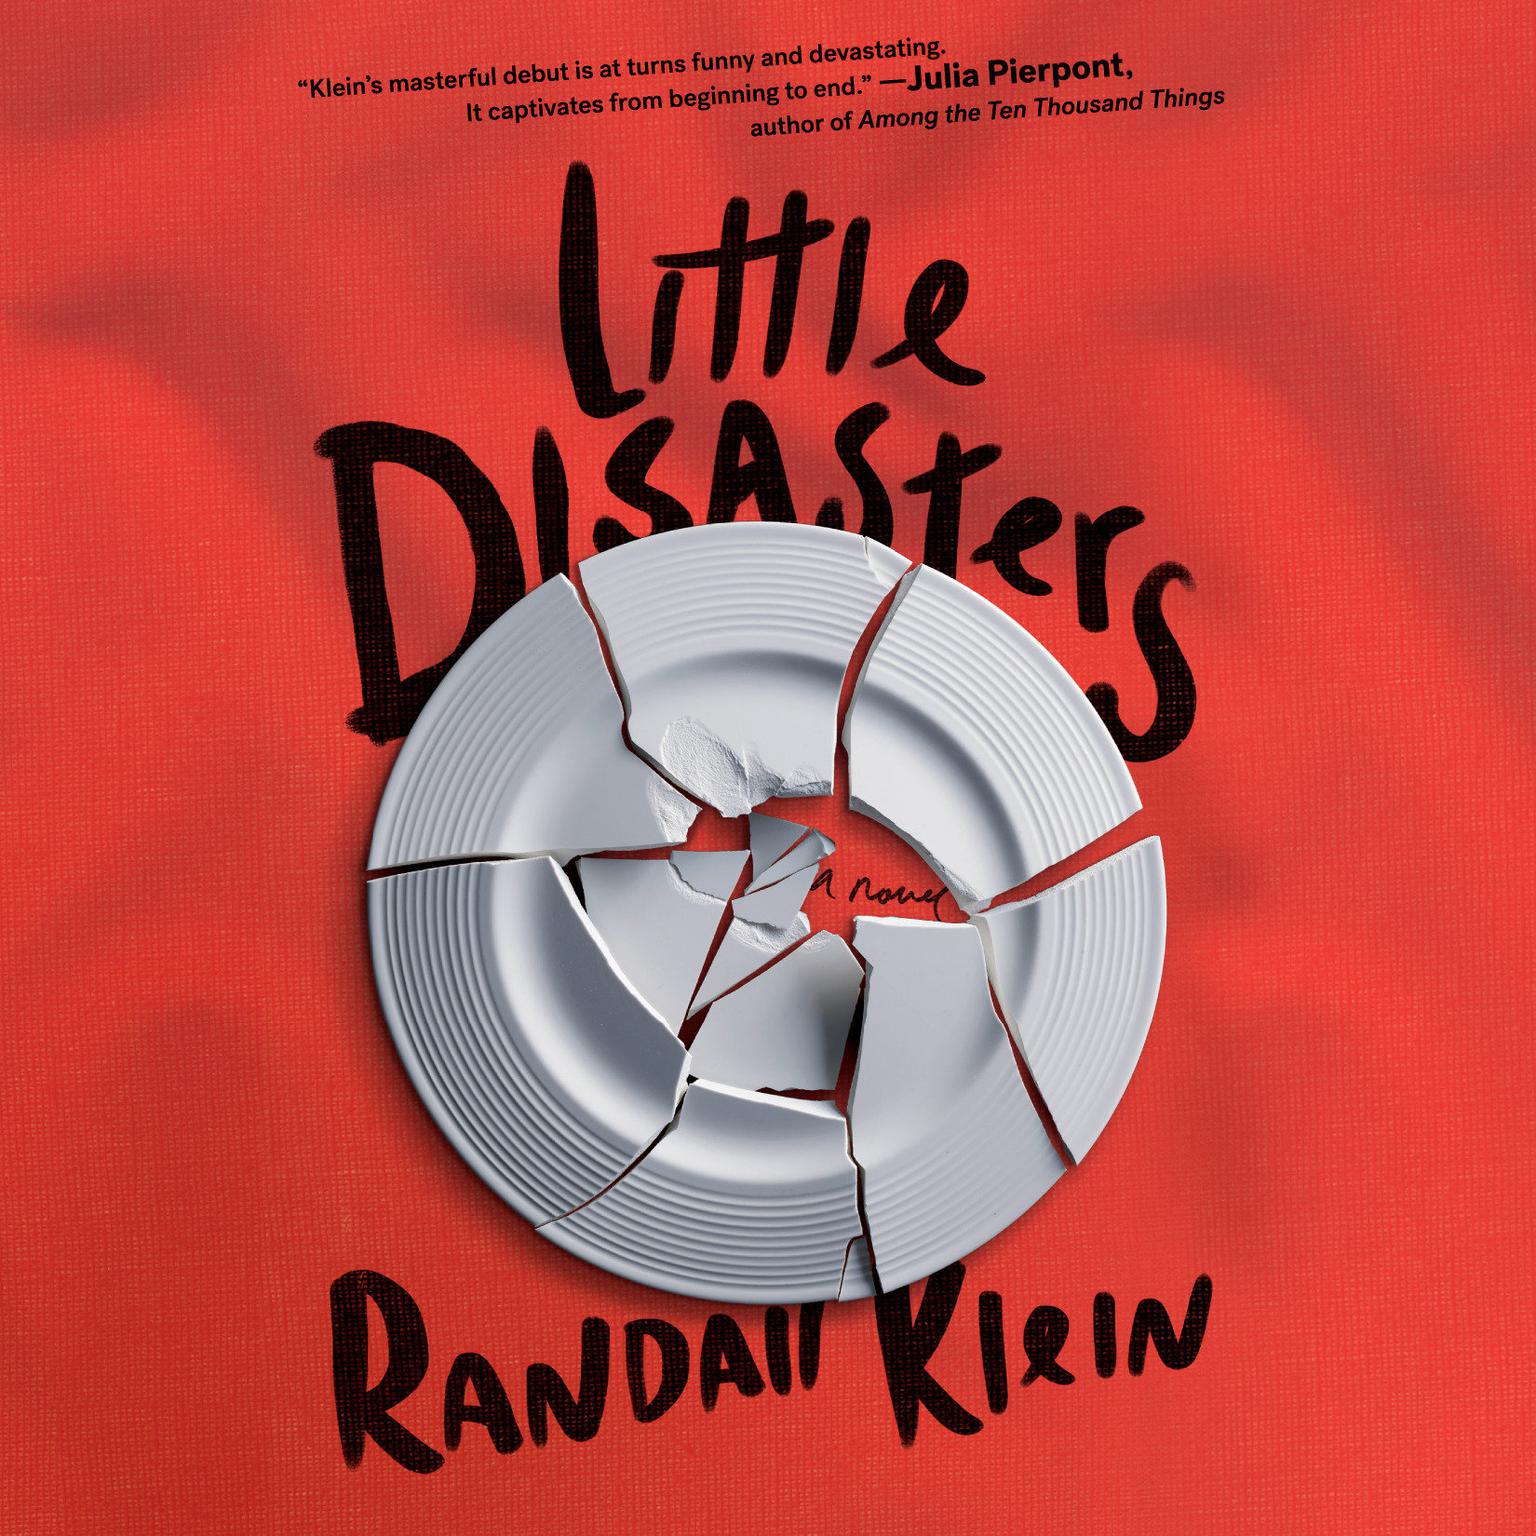 Little Disasters Audiobook, by Randall Klein